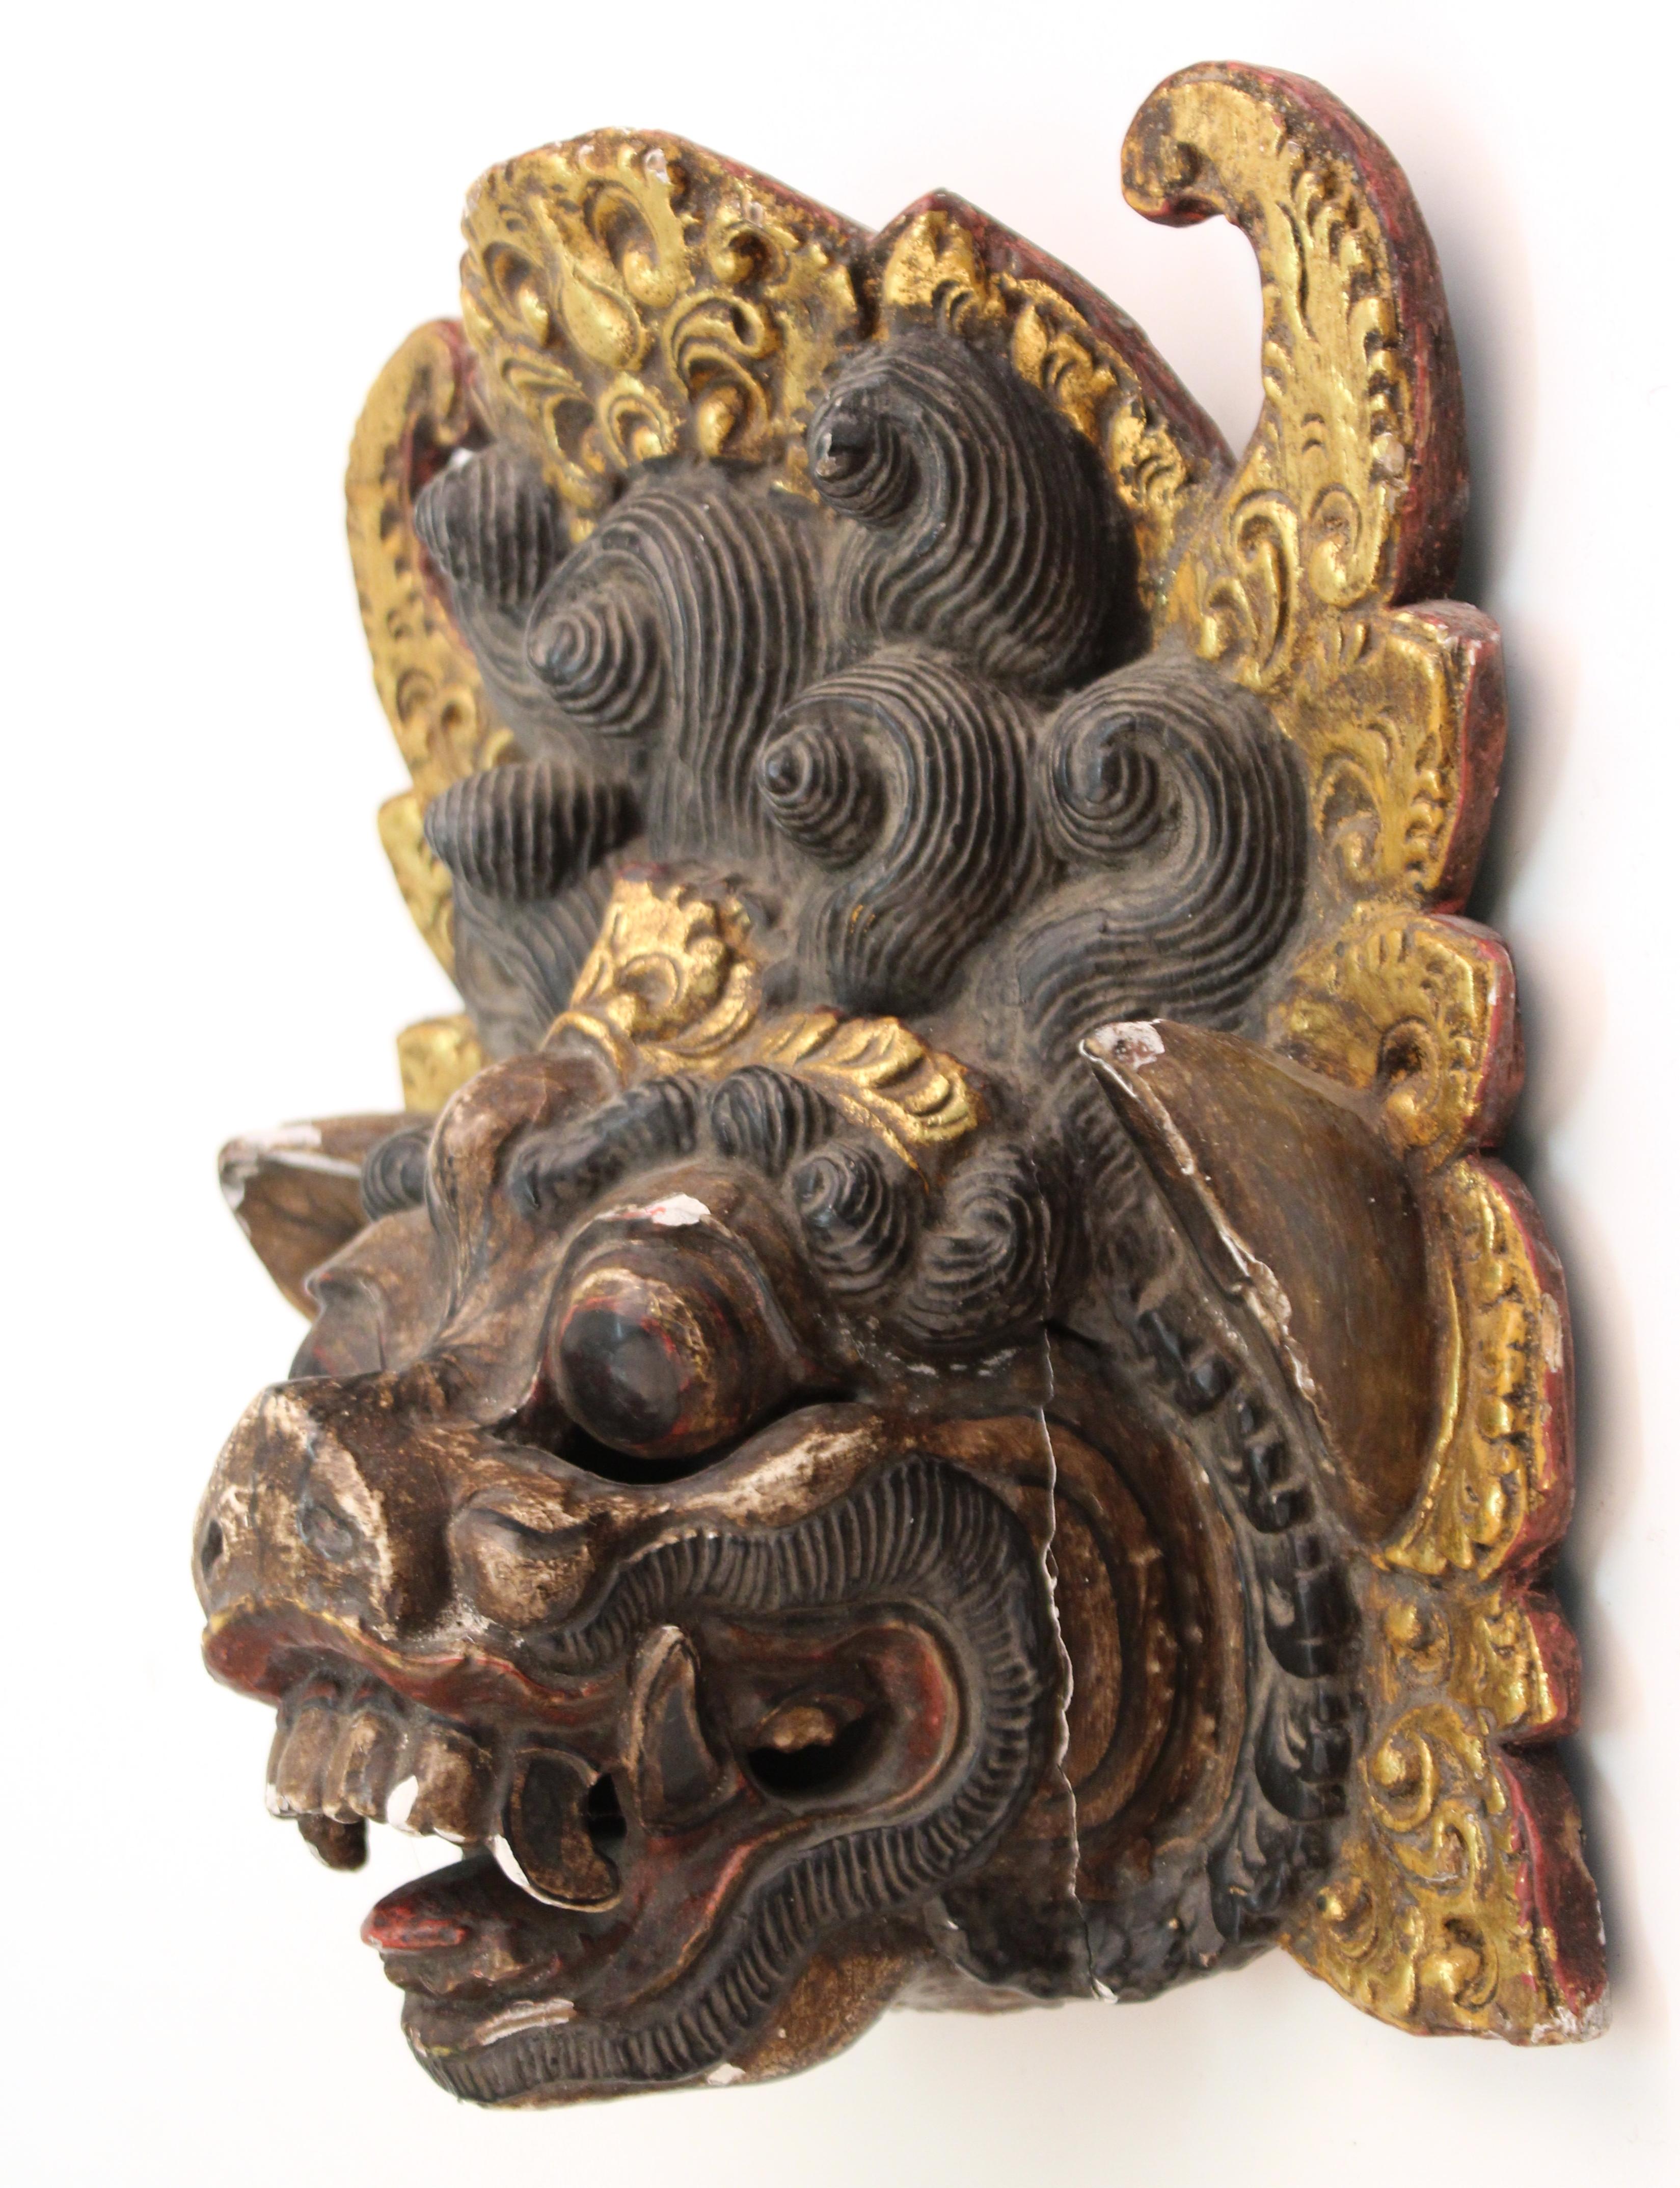 Hand carved and hand painted wood Balinese Barong dance mask of an ornate colorful mythological creature. The piece is in good vintage condition and was produced during the 20th century. Some age-appropriate wear.